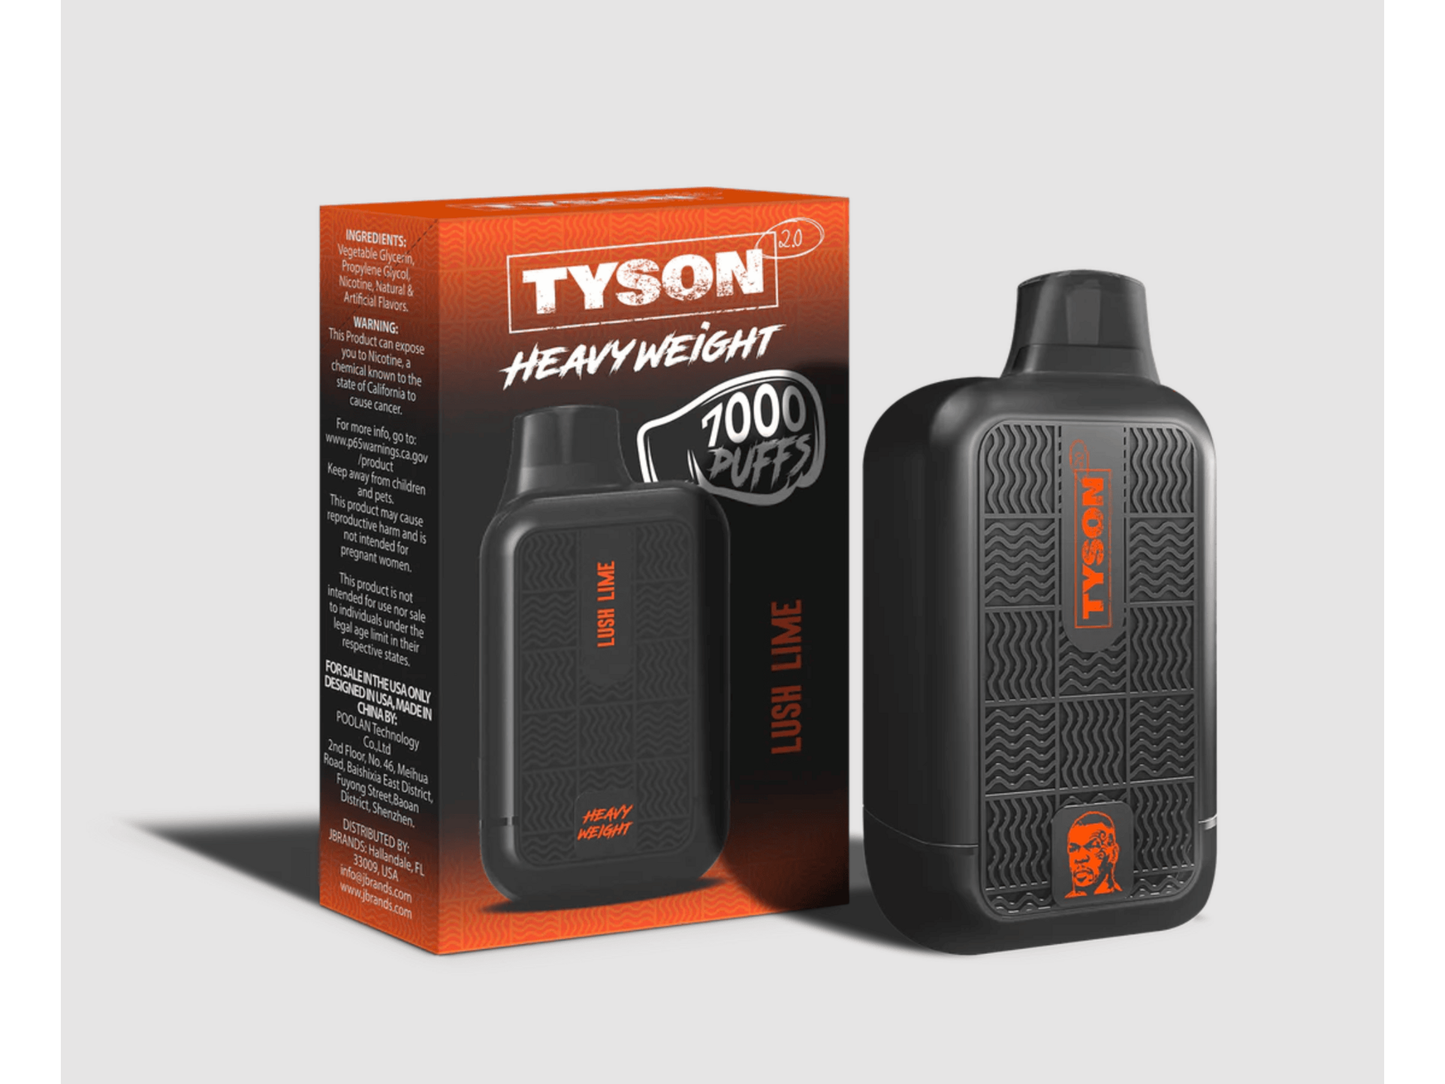 Tyson Heavyweight Lush Lime flavored disposable vape device and box.